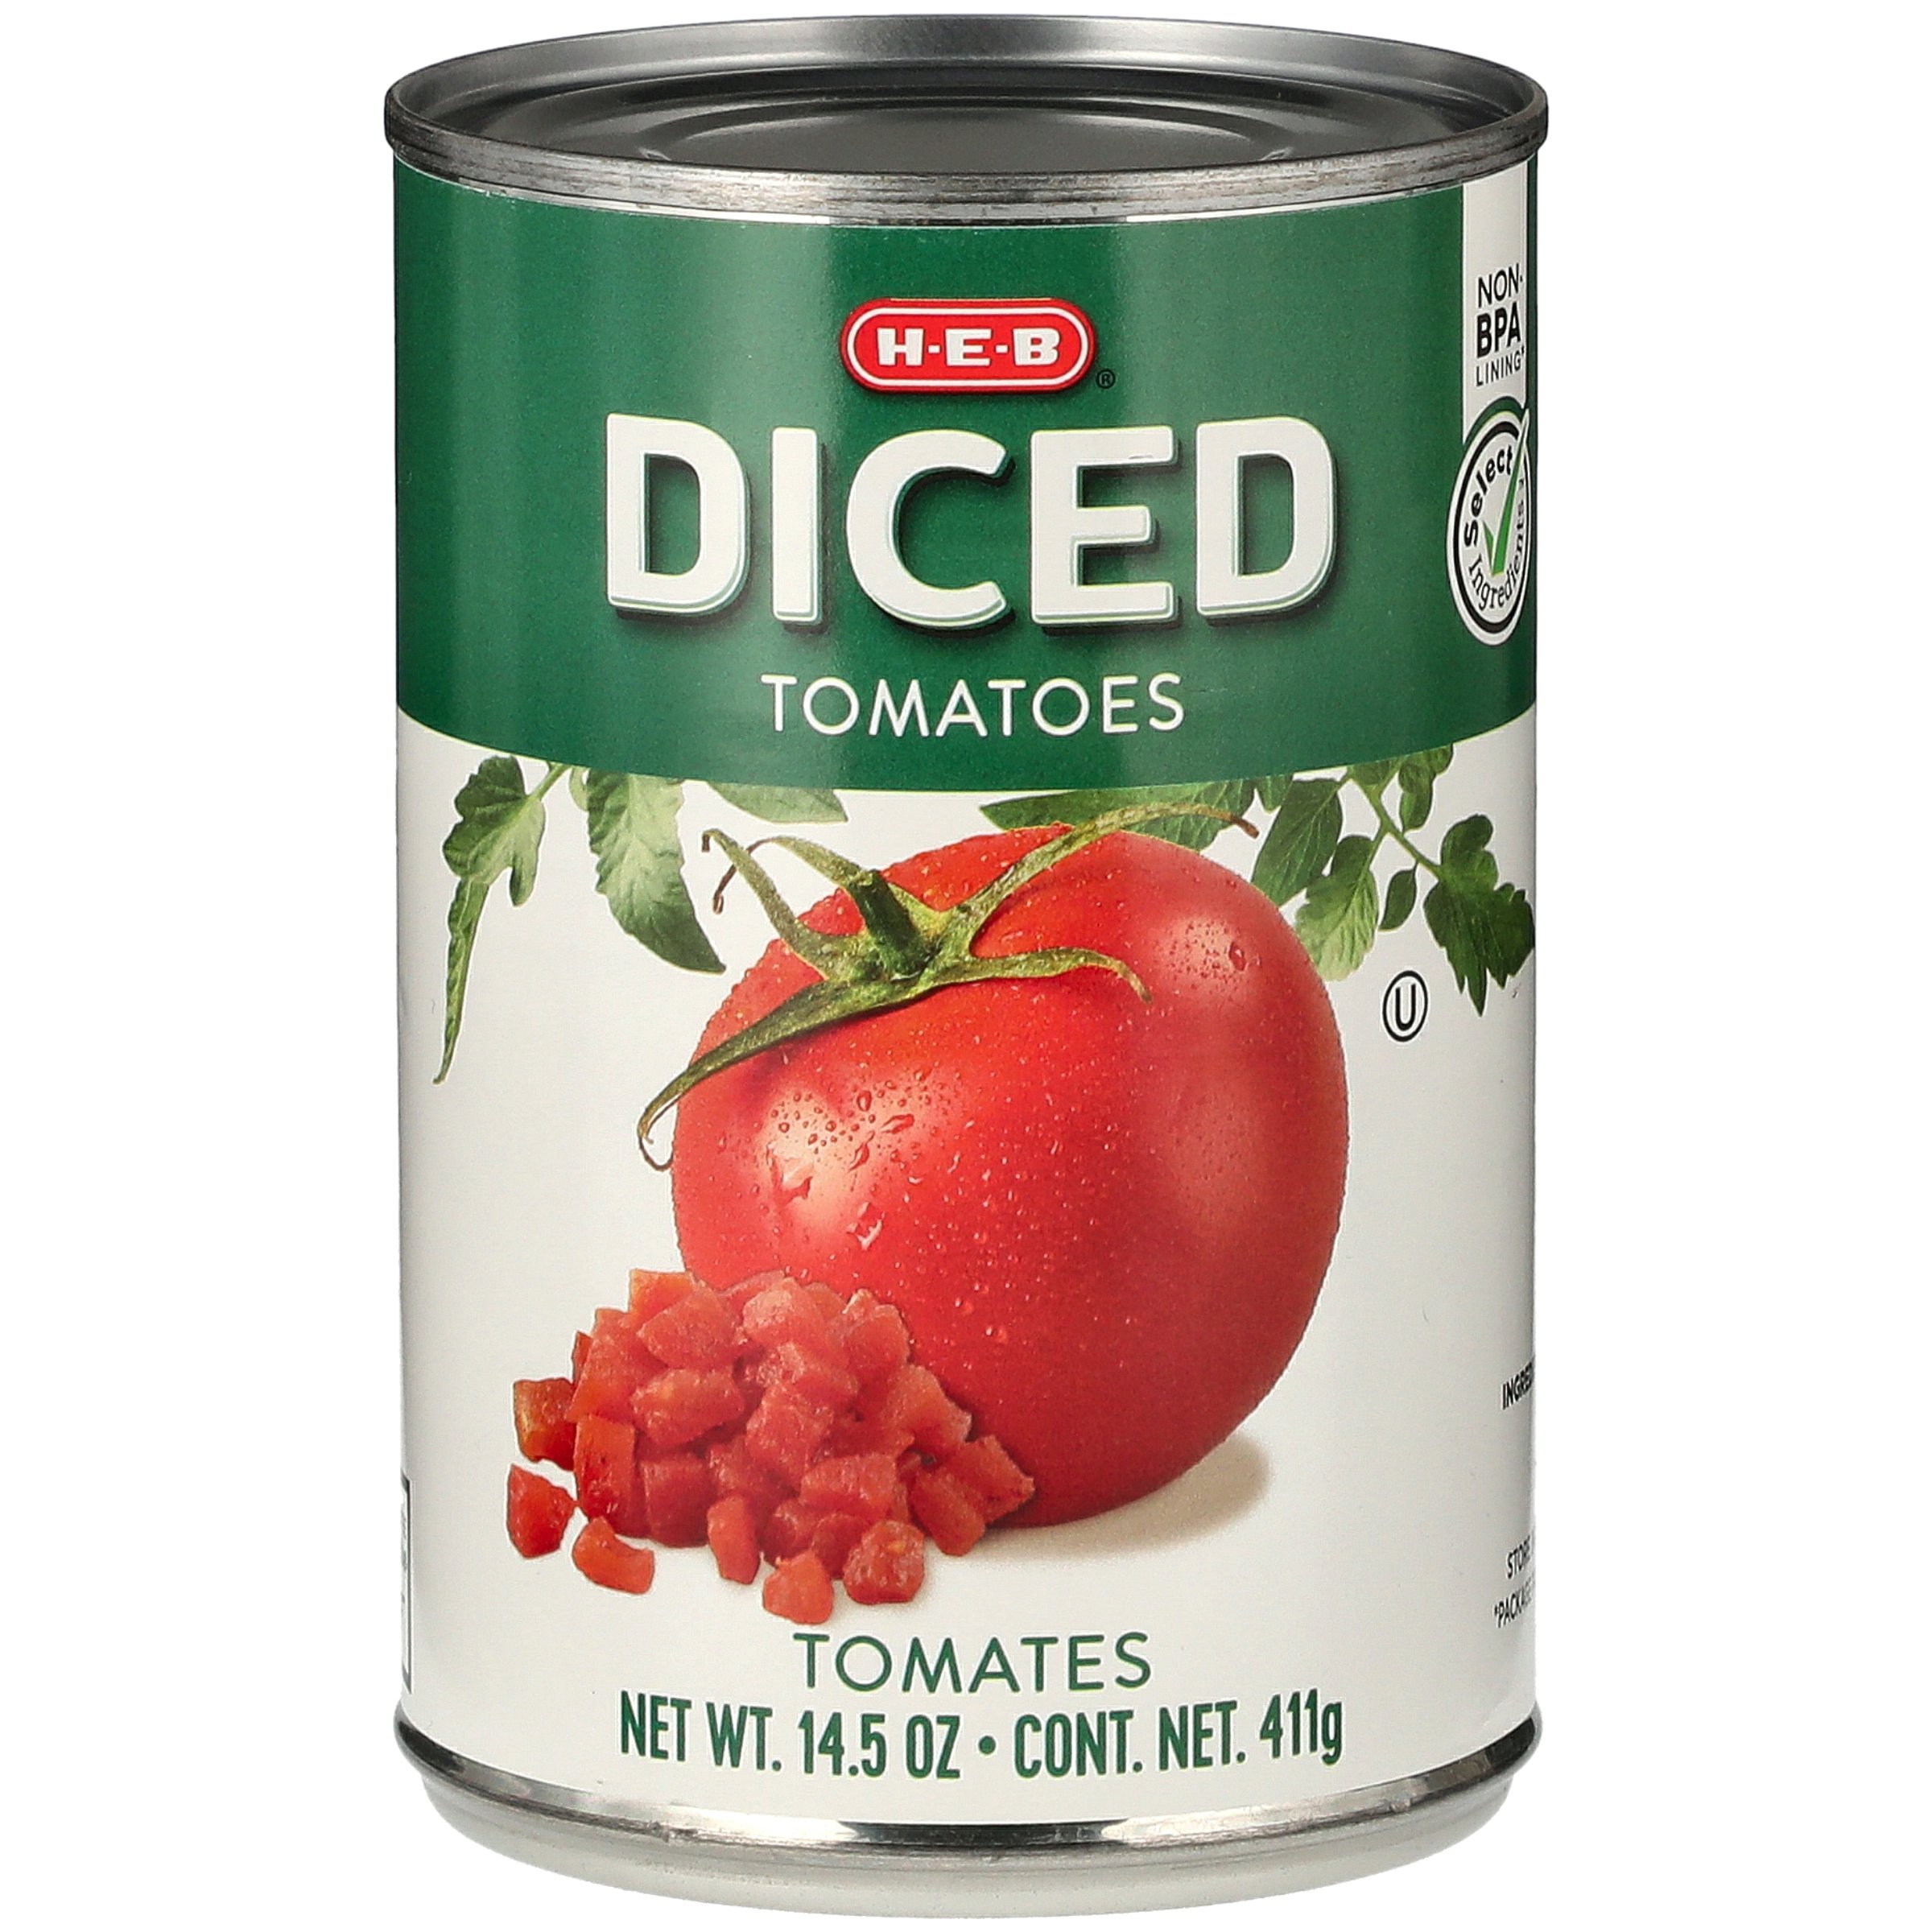 H E B Select Ingredients Diced Tomatoes Shop Vegetables At H E B,Spiderwort Leaves